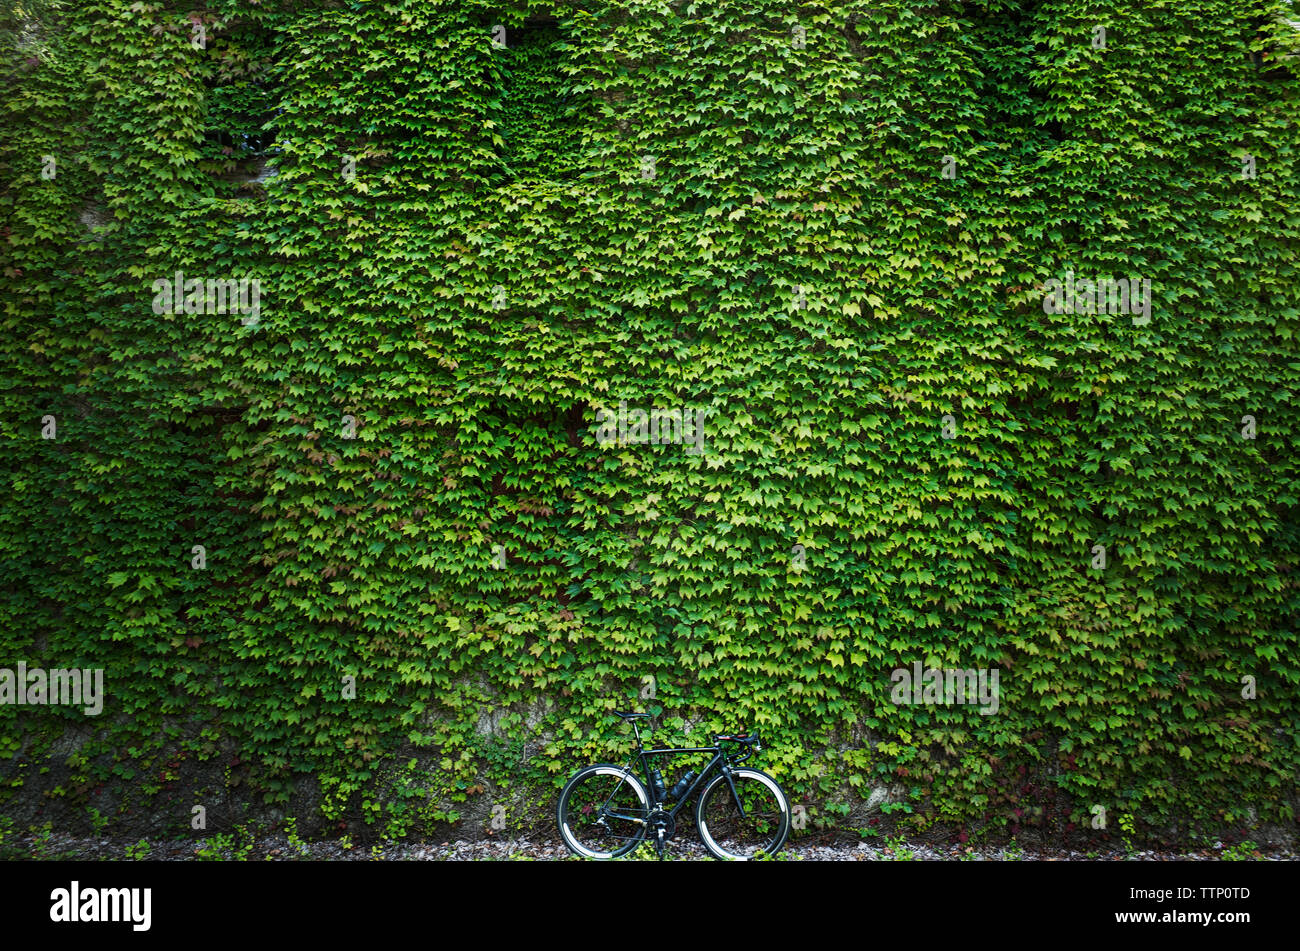 Bicycle parked against ivy covered building Stock Photo